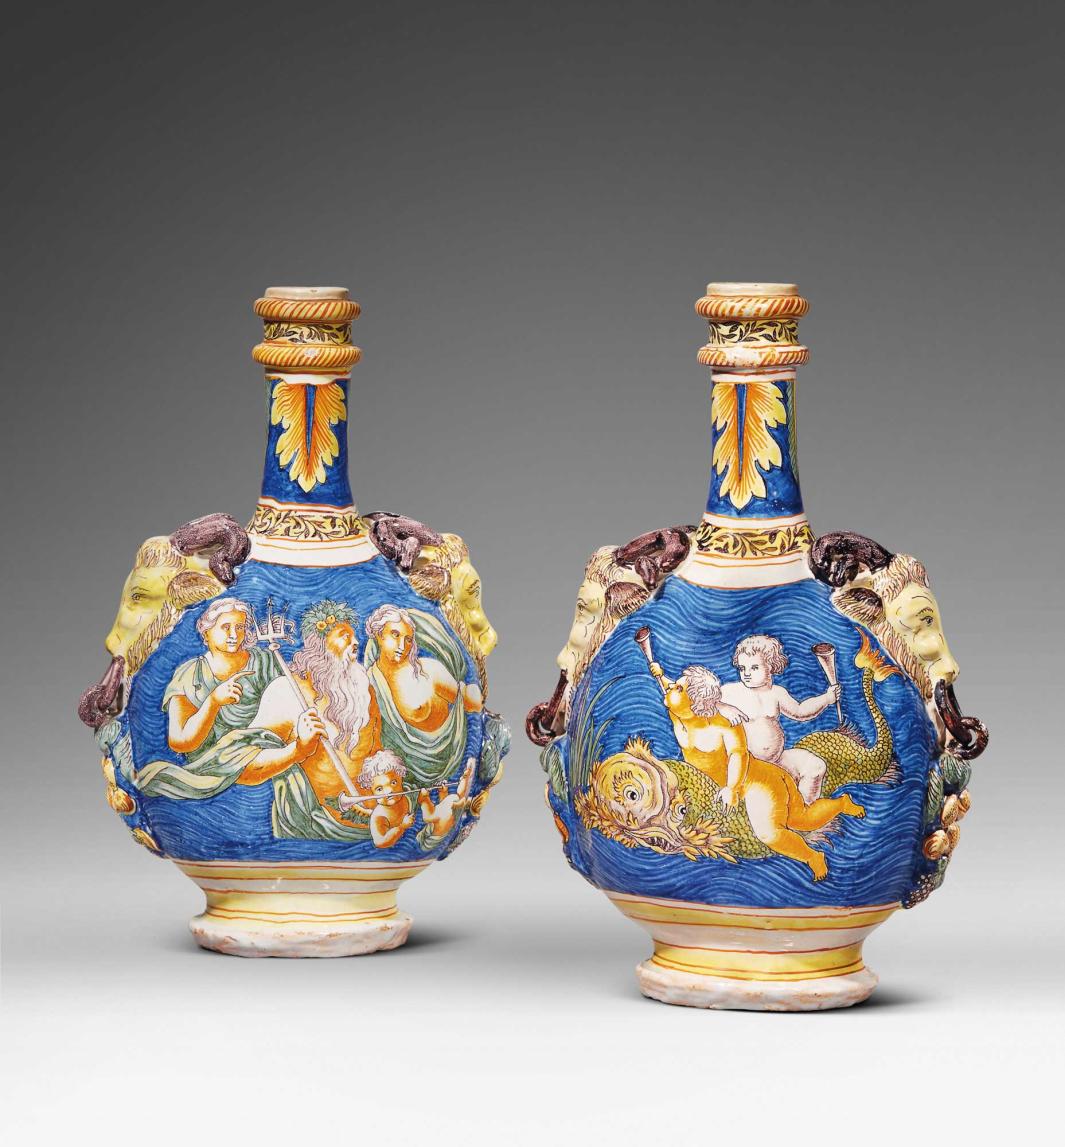 Two earthenware flasks with protruding goat heads as handles. One flask depicts a group of people floating in a body of water with one holding a trident at the center. The other flask depicts two small figures holding horns and riding a sea creature.